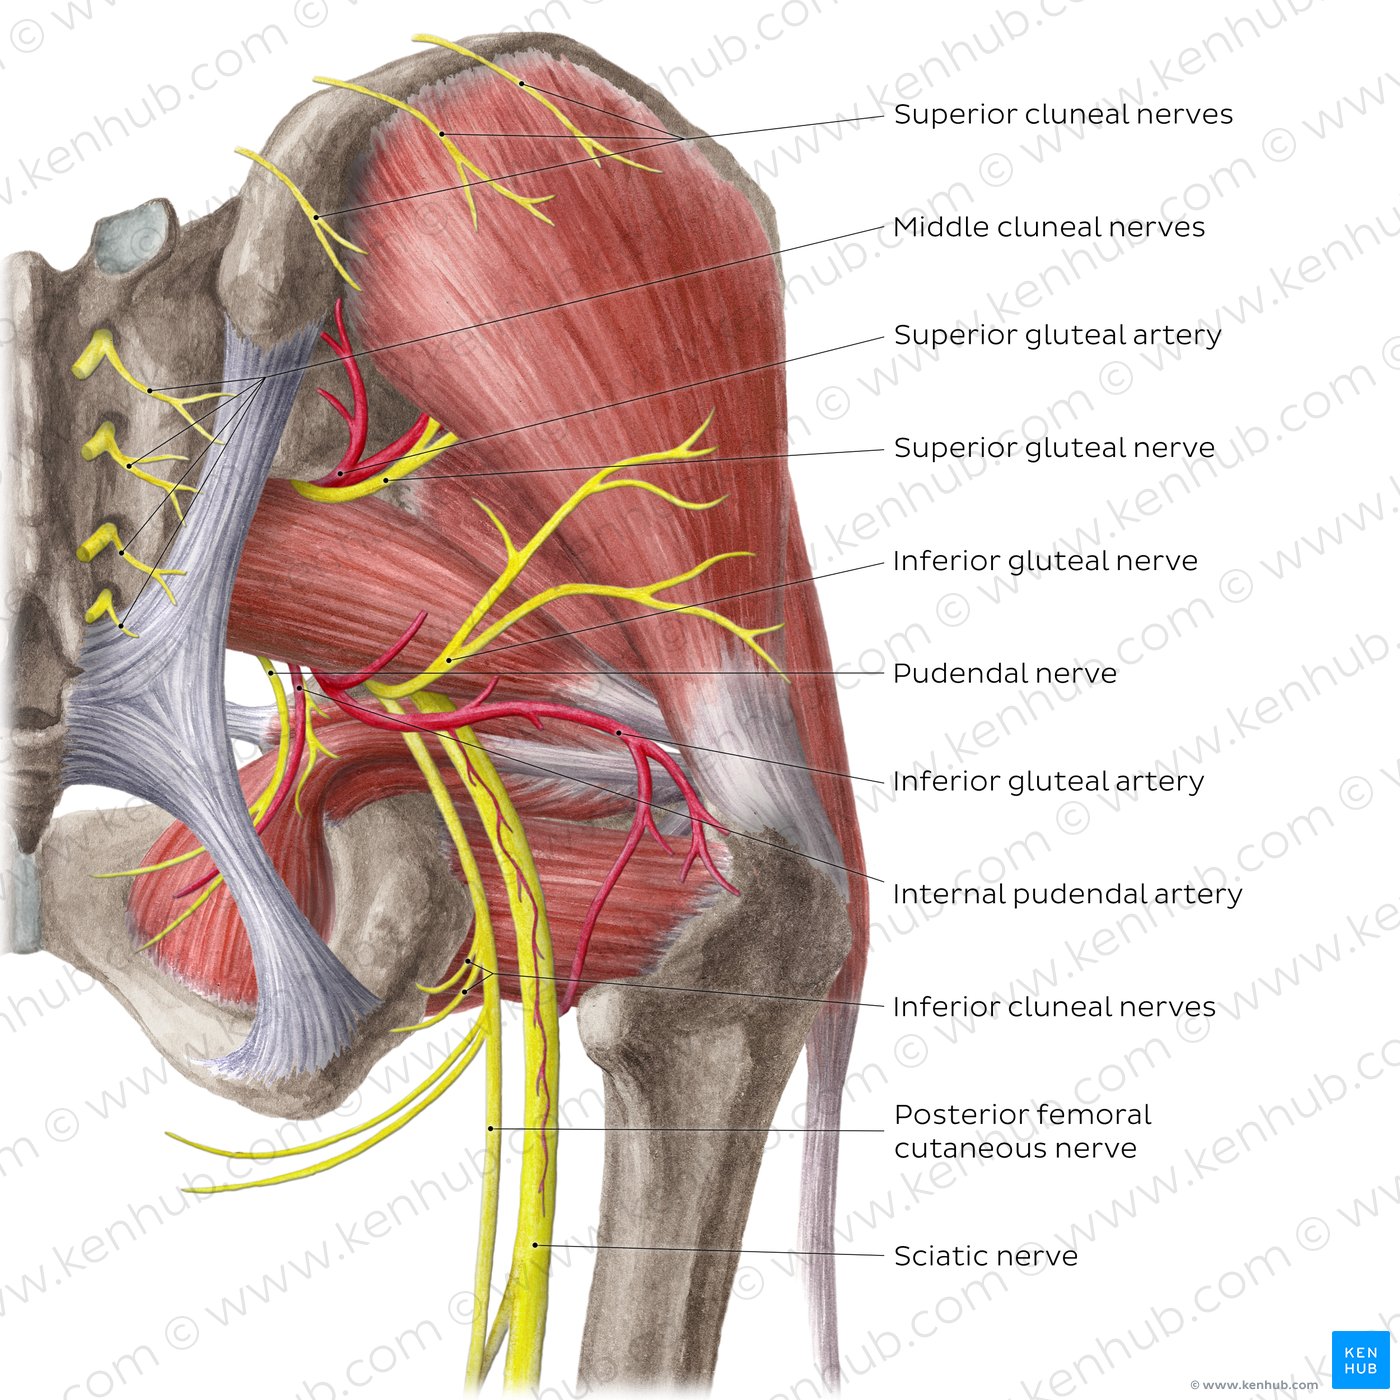 Arteries and nerves of the hip and thigh (posterior view)